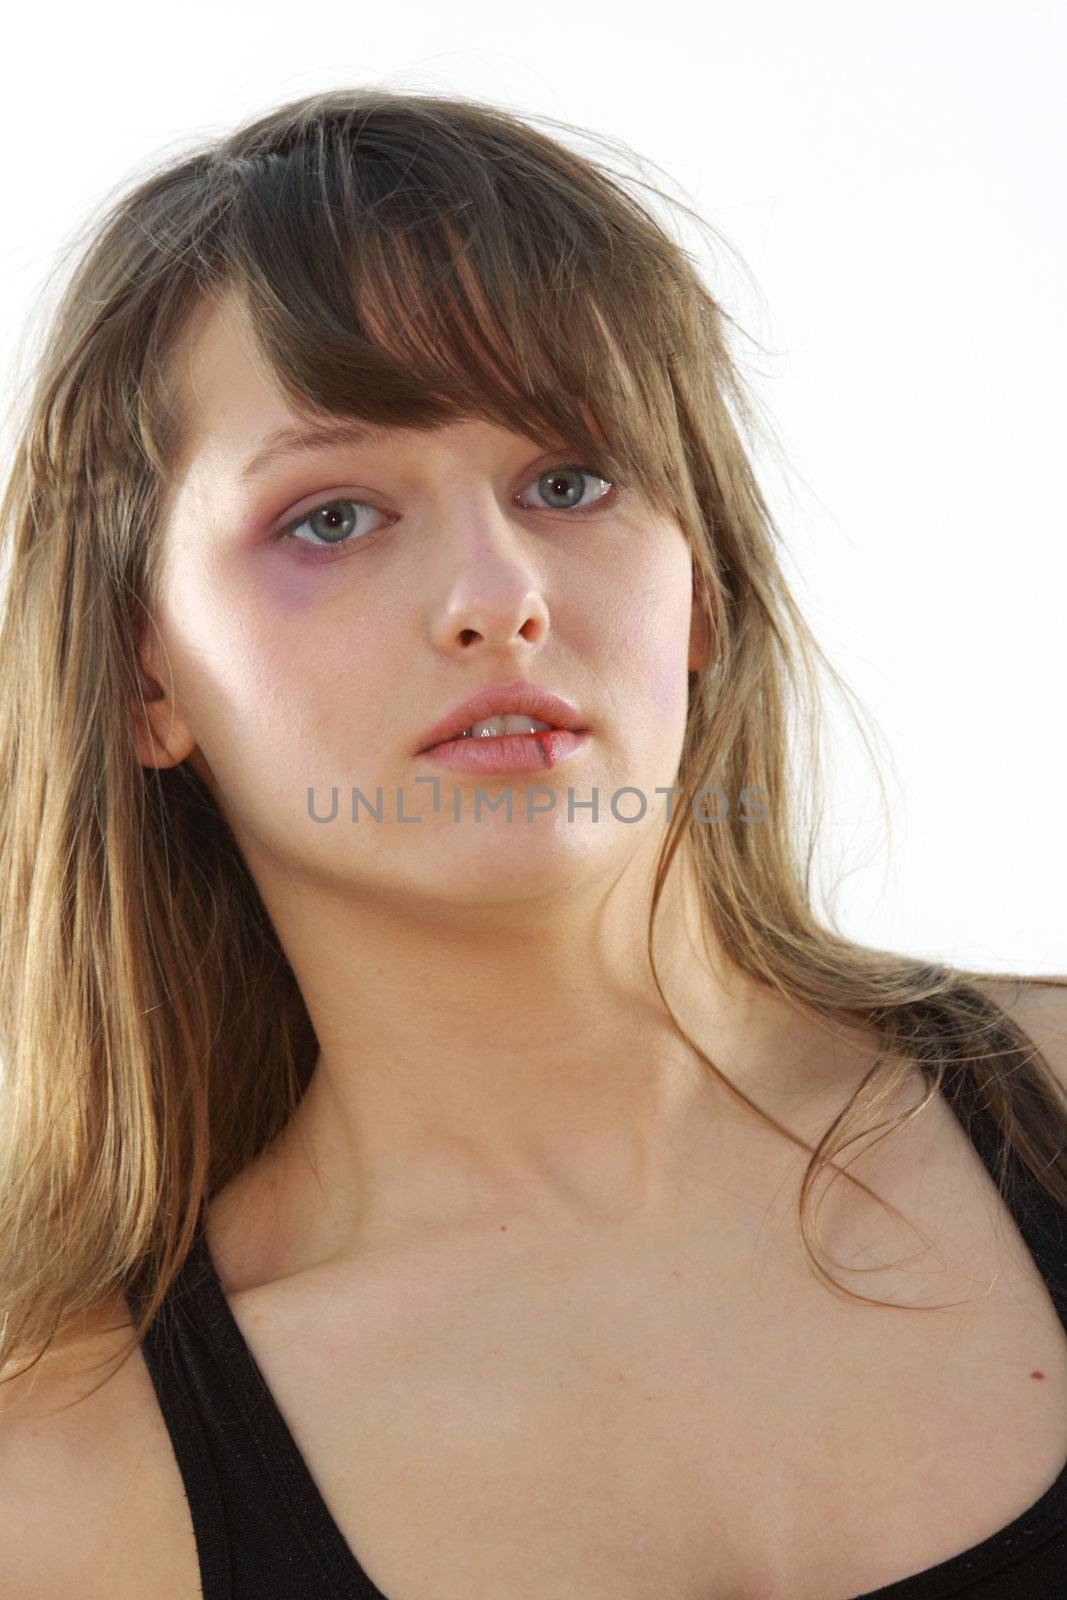 Abused girl over white background